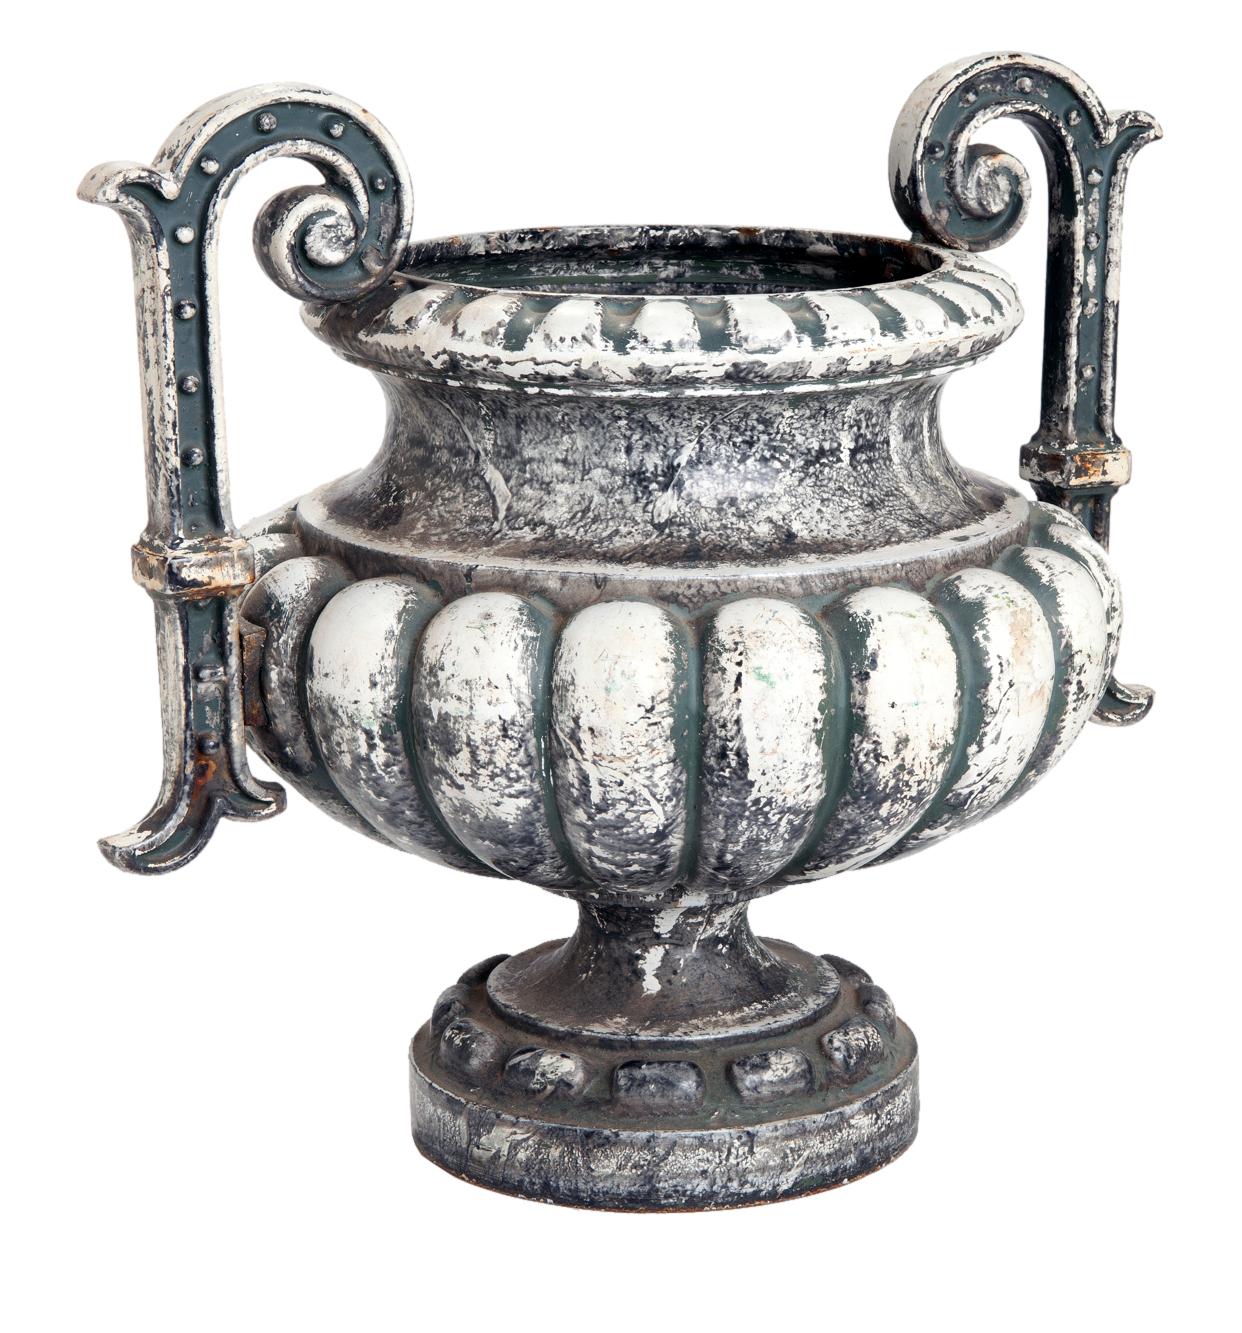 Antique French garden urn, early 1800's cast iron urn with an enameled finish. 
Original patined, imported from Paris by an American collector.